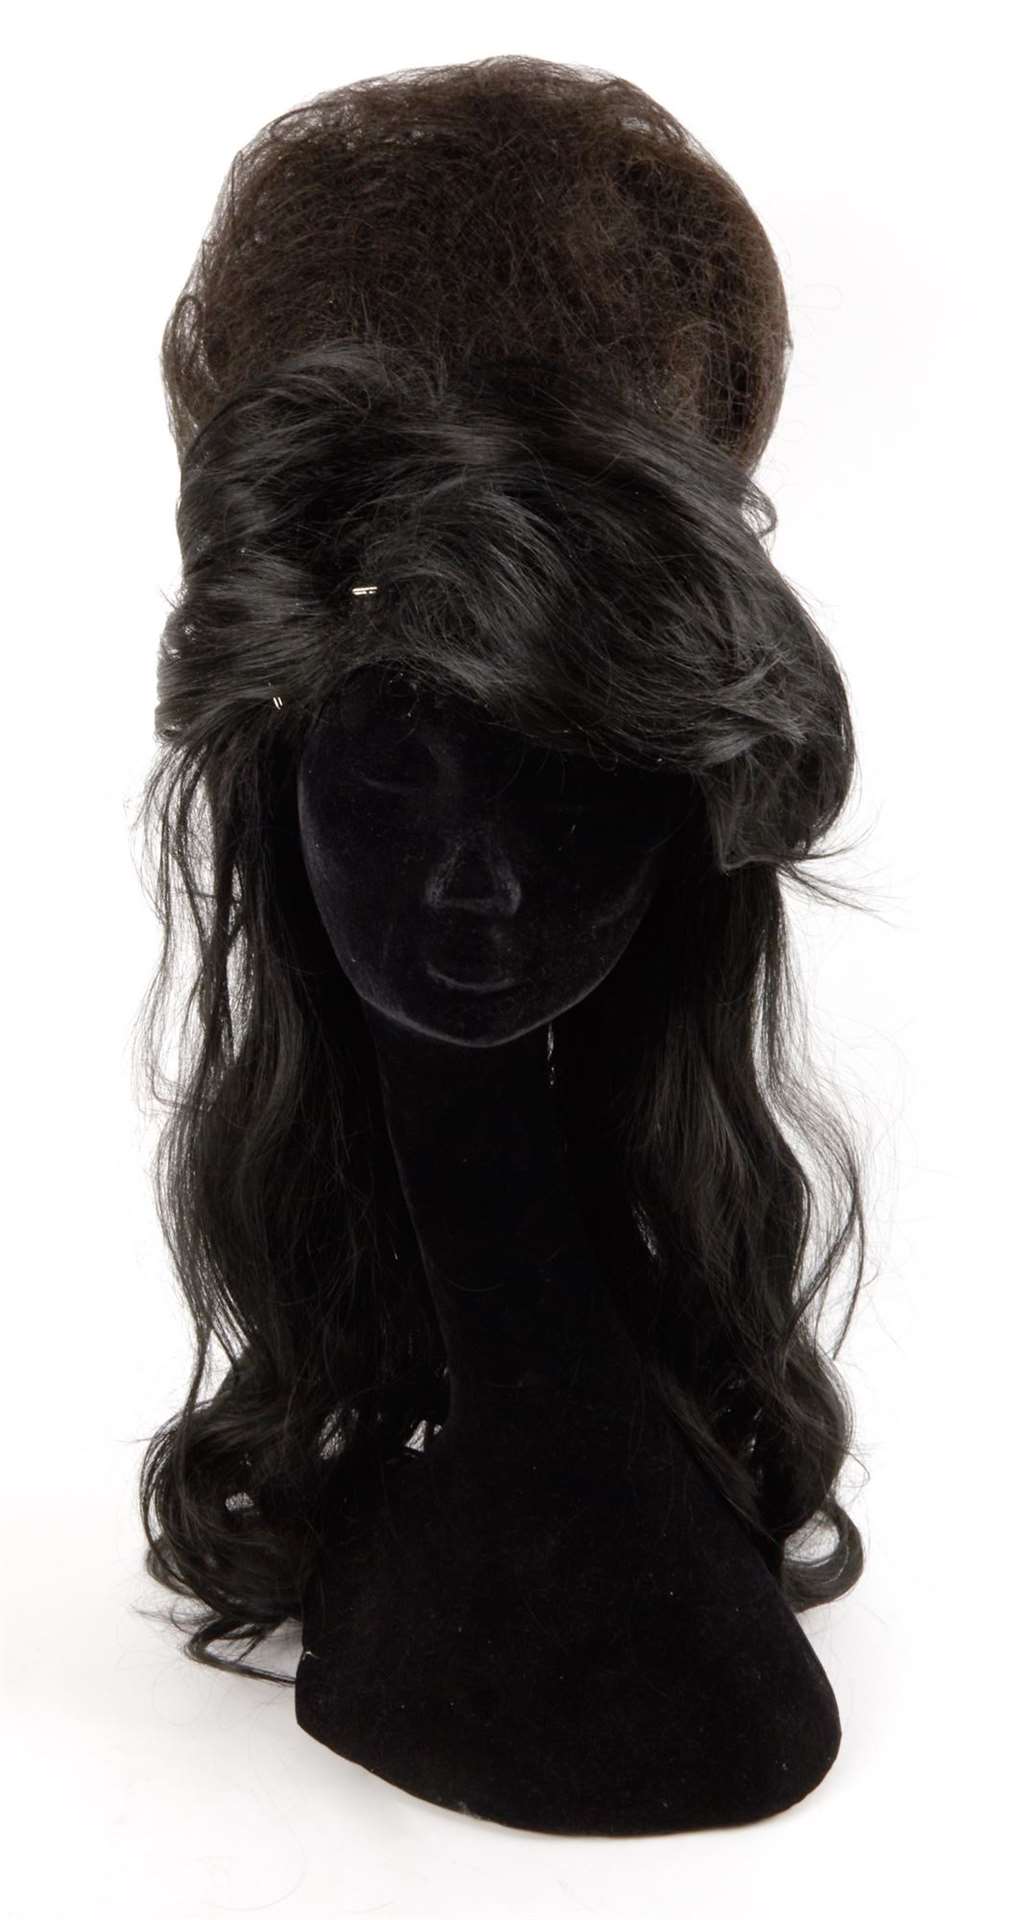 Winehouse’s beehive hair topper, worn during her performance at the 2008 Grammy Awards ceremony is priced at up to 20,000 dollars (£17,000) (Julien’s Auctions/PA)